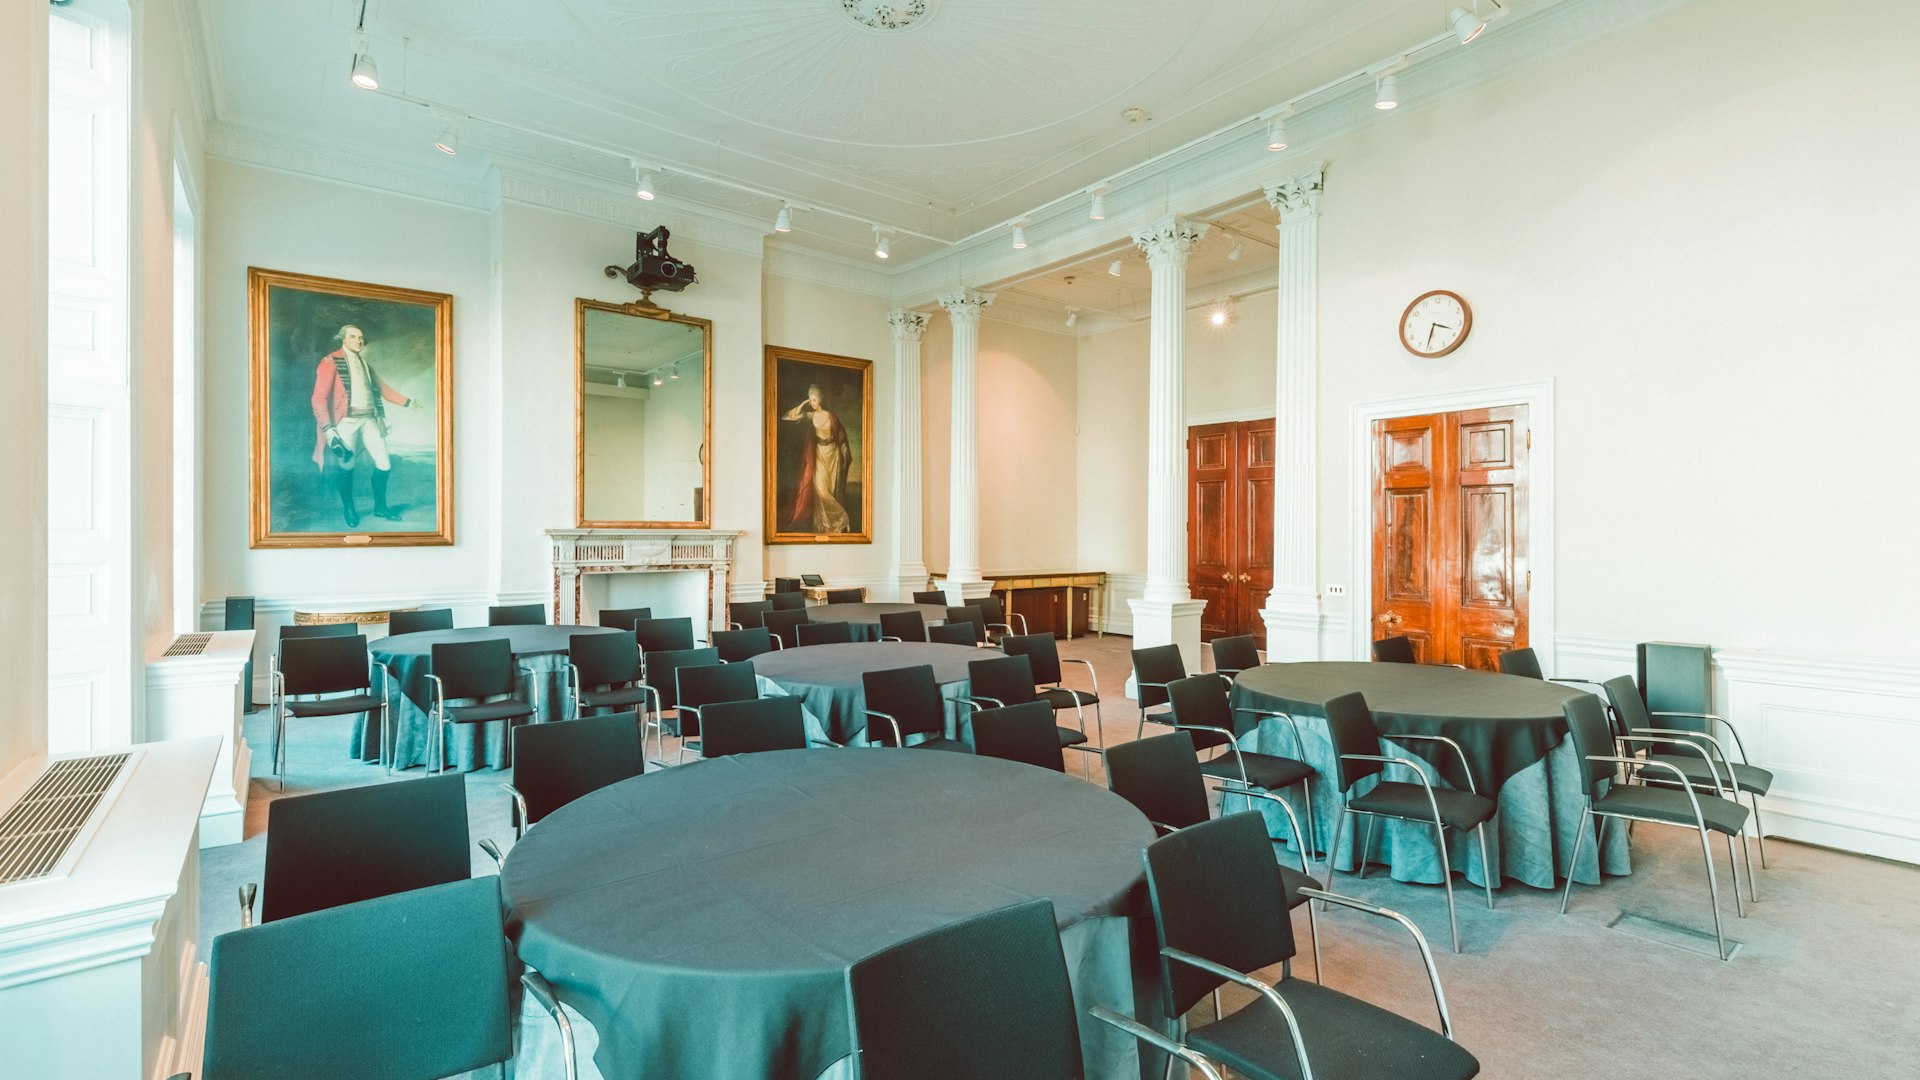 41 Portland Place Council Chamber